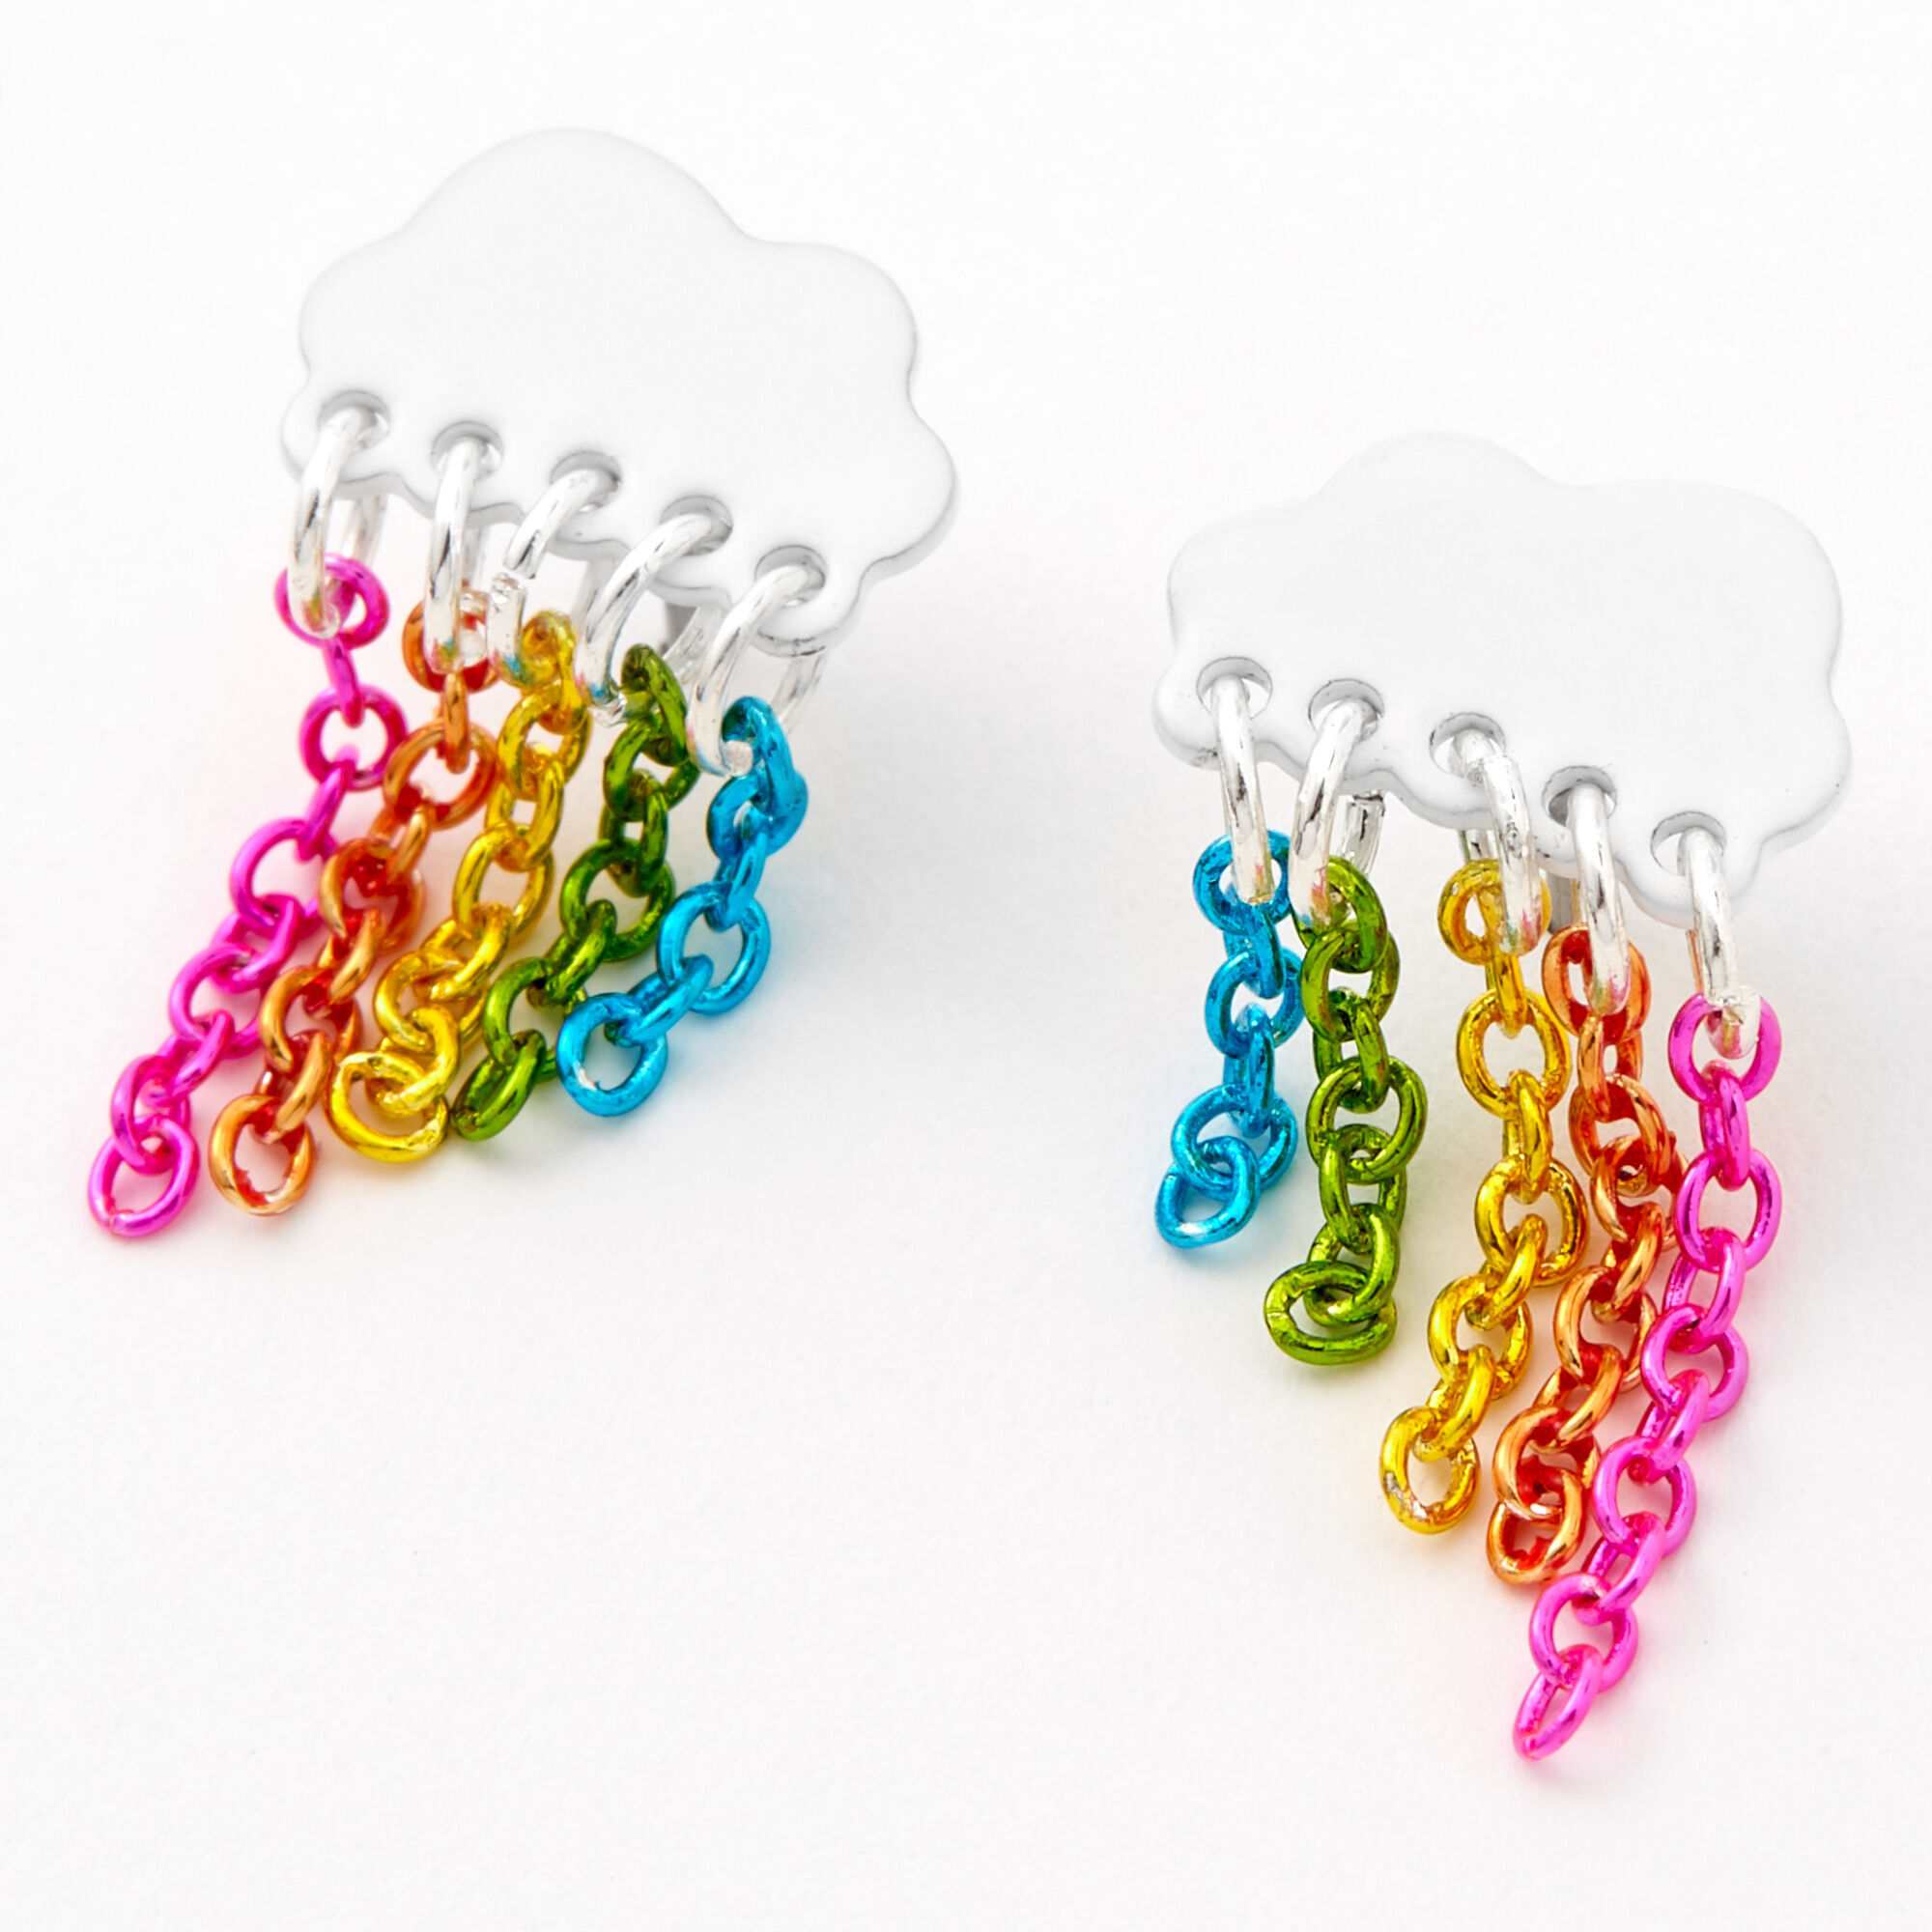 View Claires Tone Rainbow Chain Cloud Stud Earrings Silver information